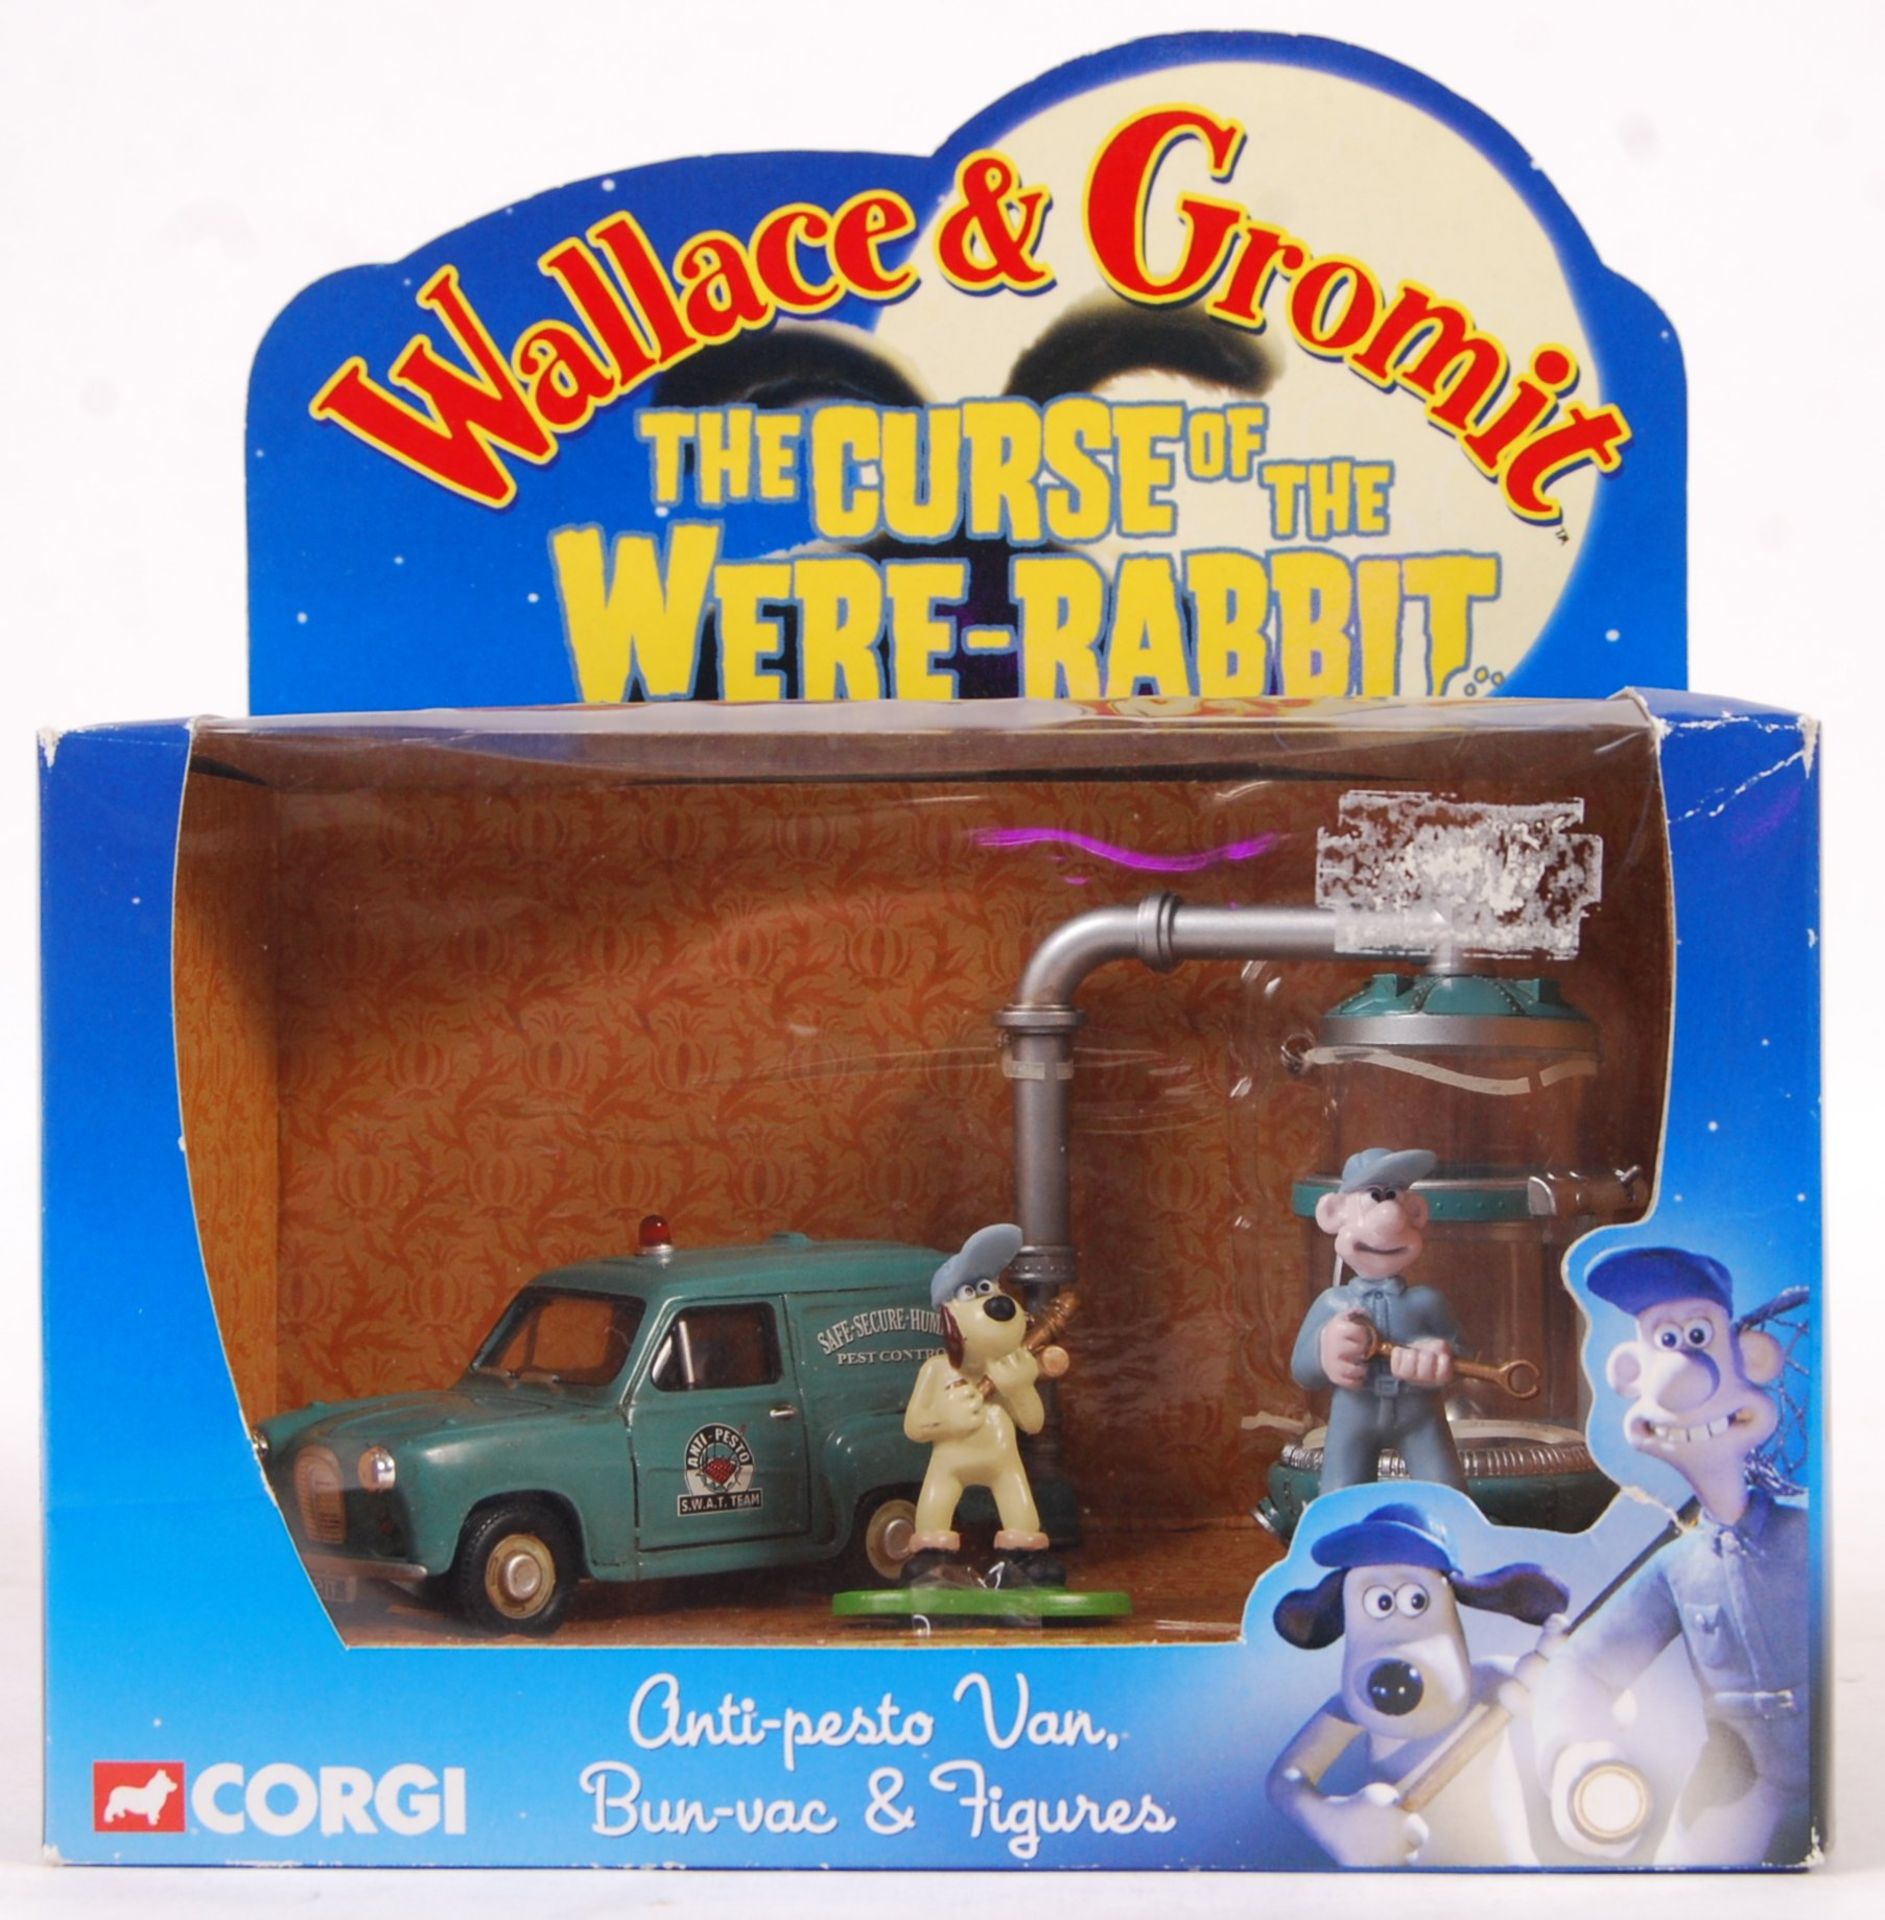 COLLECTION OF CORGI FILM RELATED DIECAST MODELS - Image 4 of 6